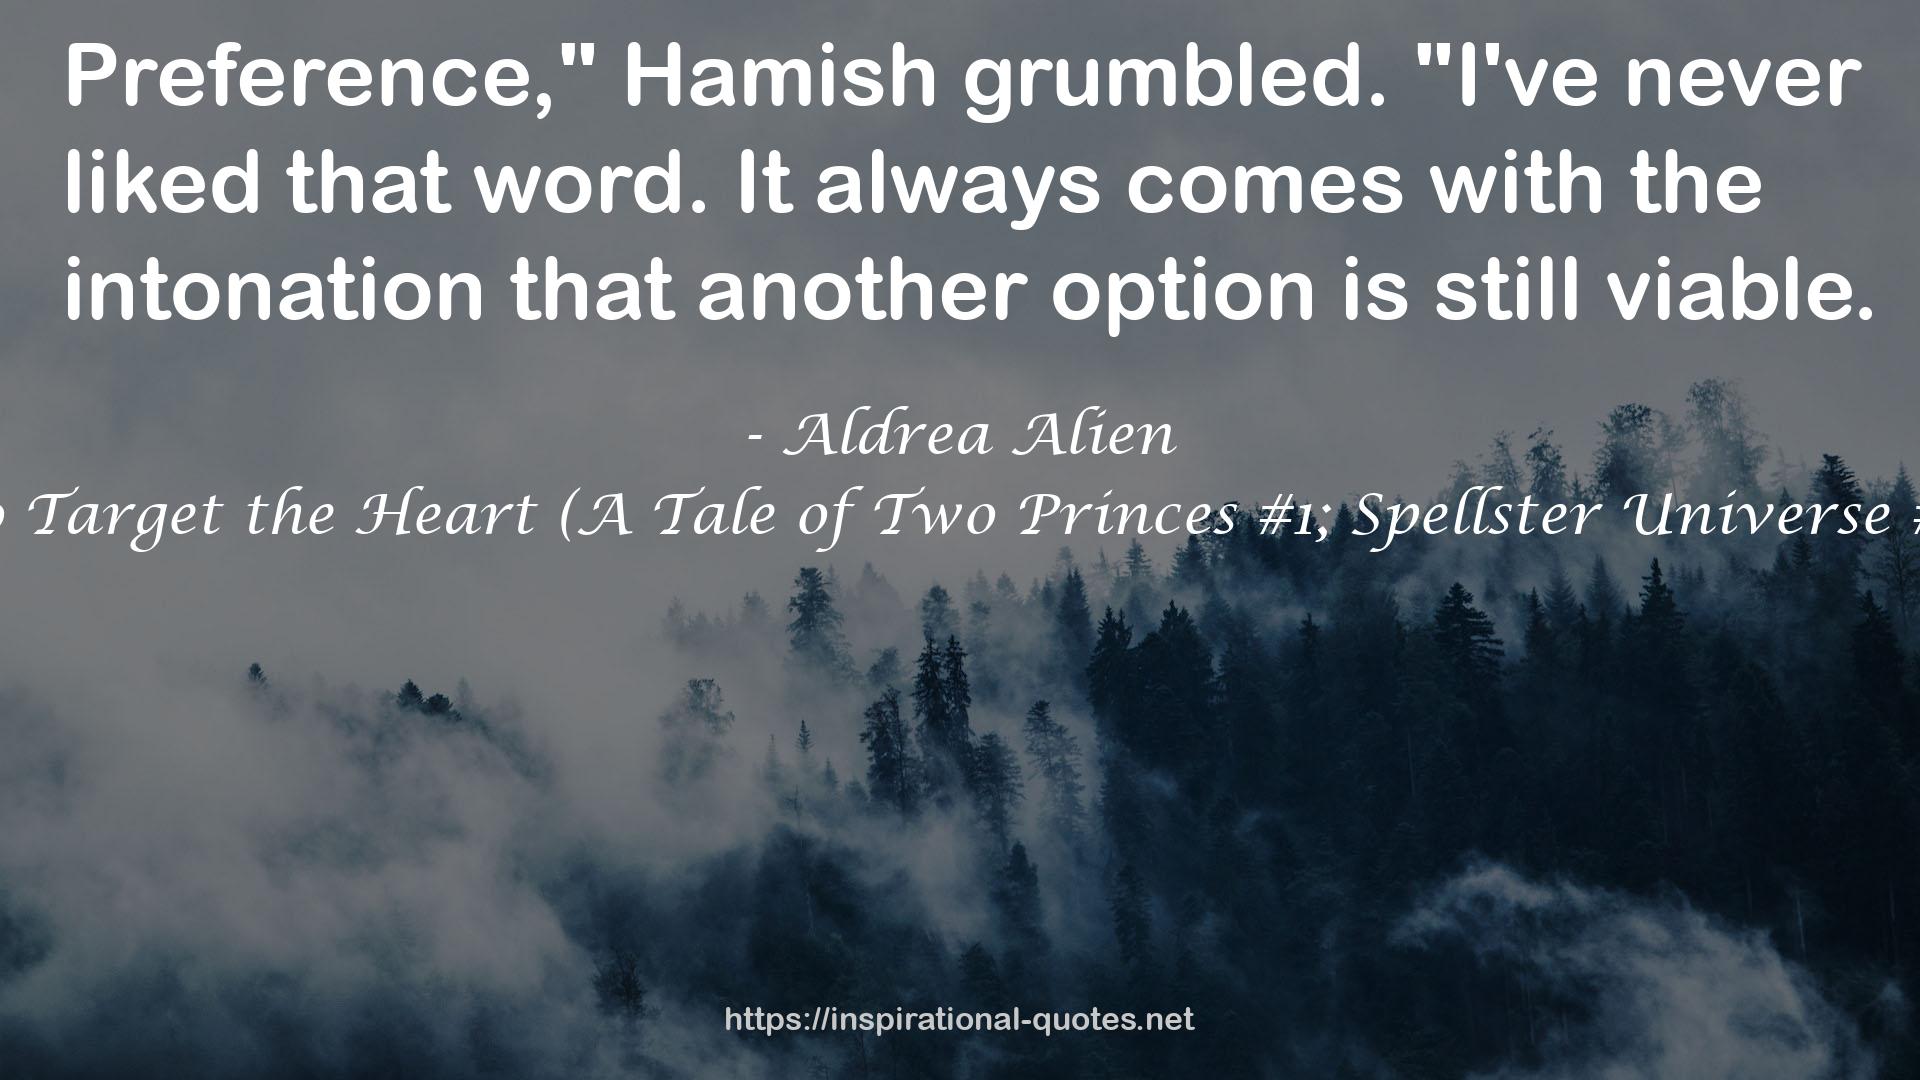 To Target the Heart (A Tale of Two Princes #1; Spellster Universe #1) QUOTES